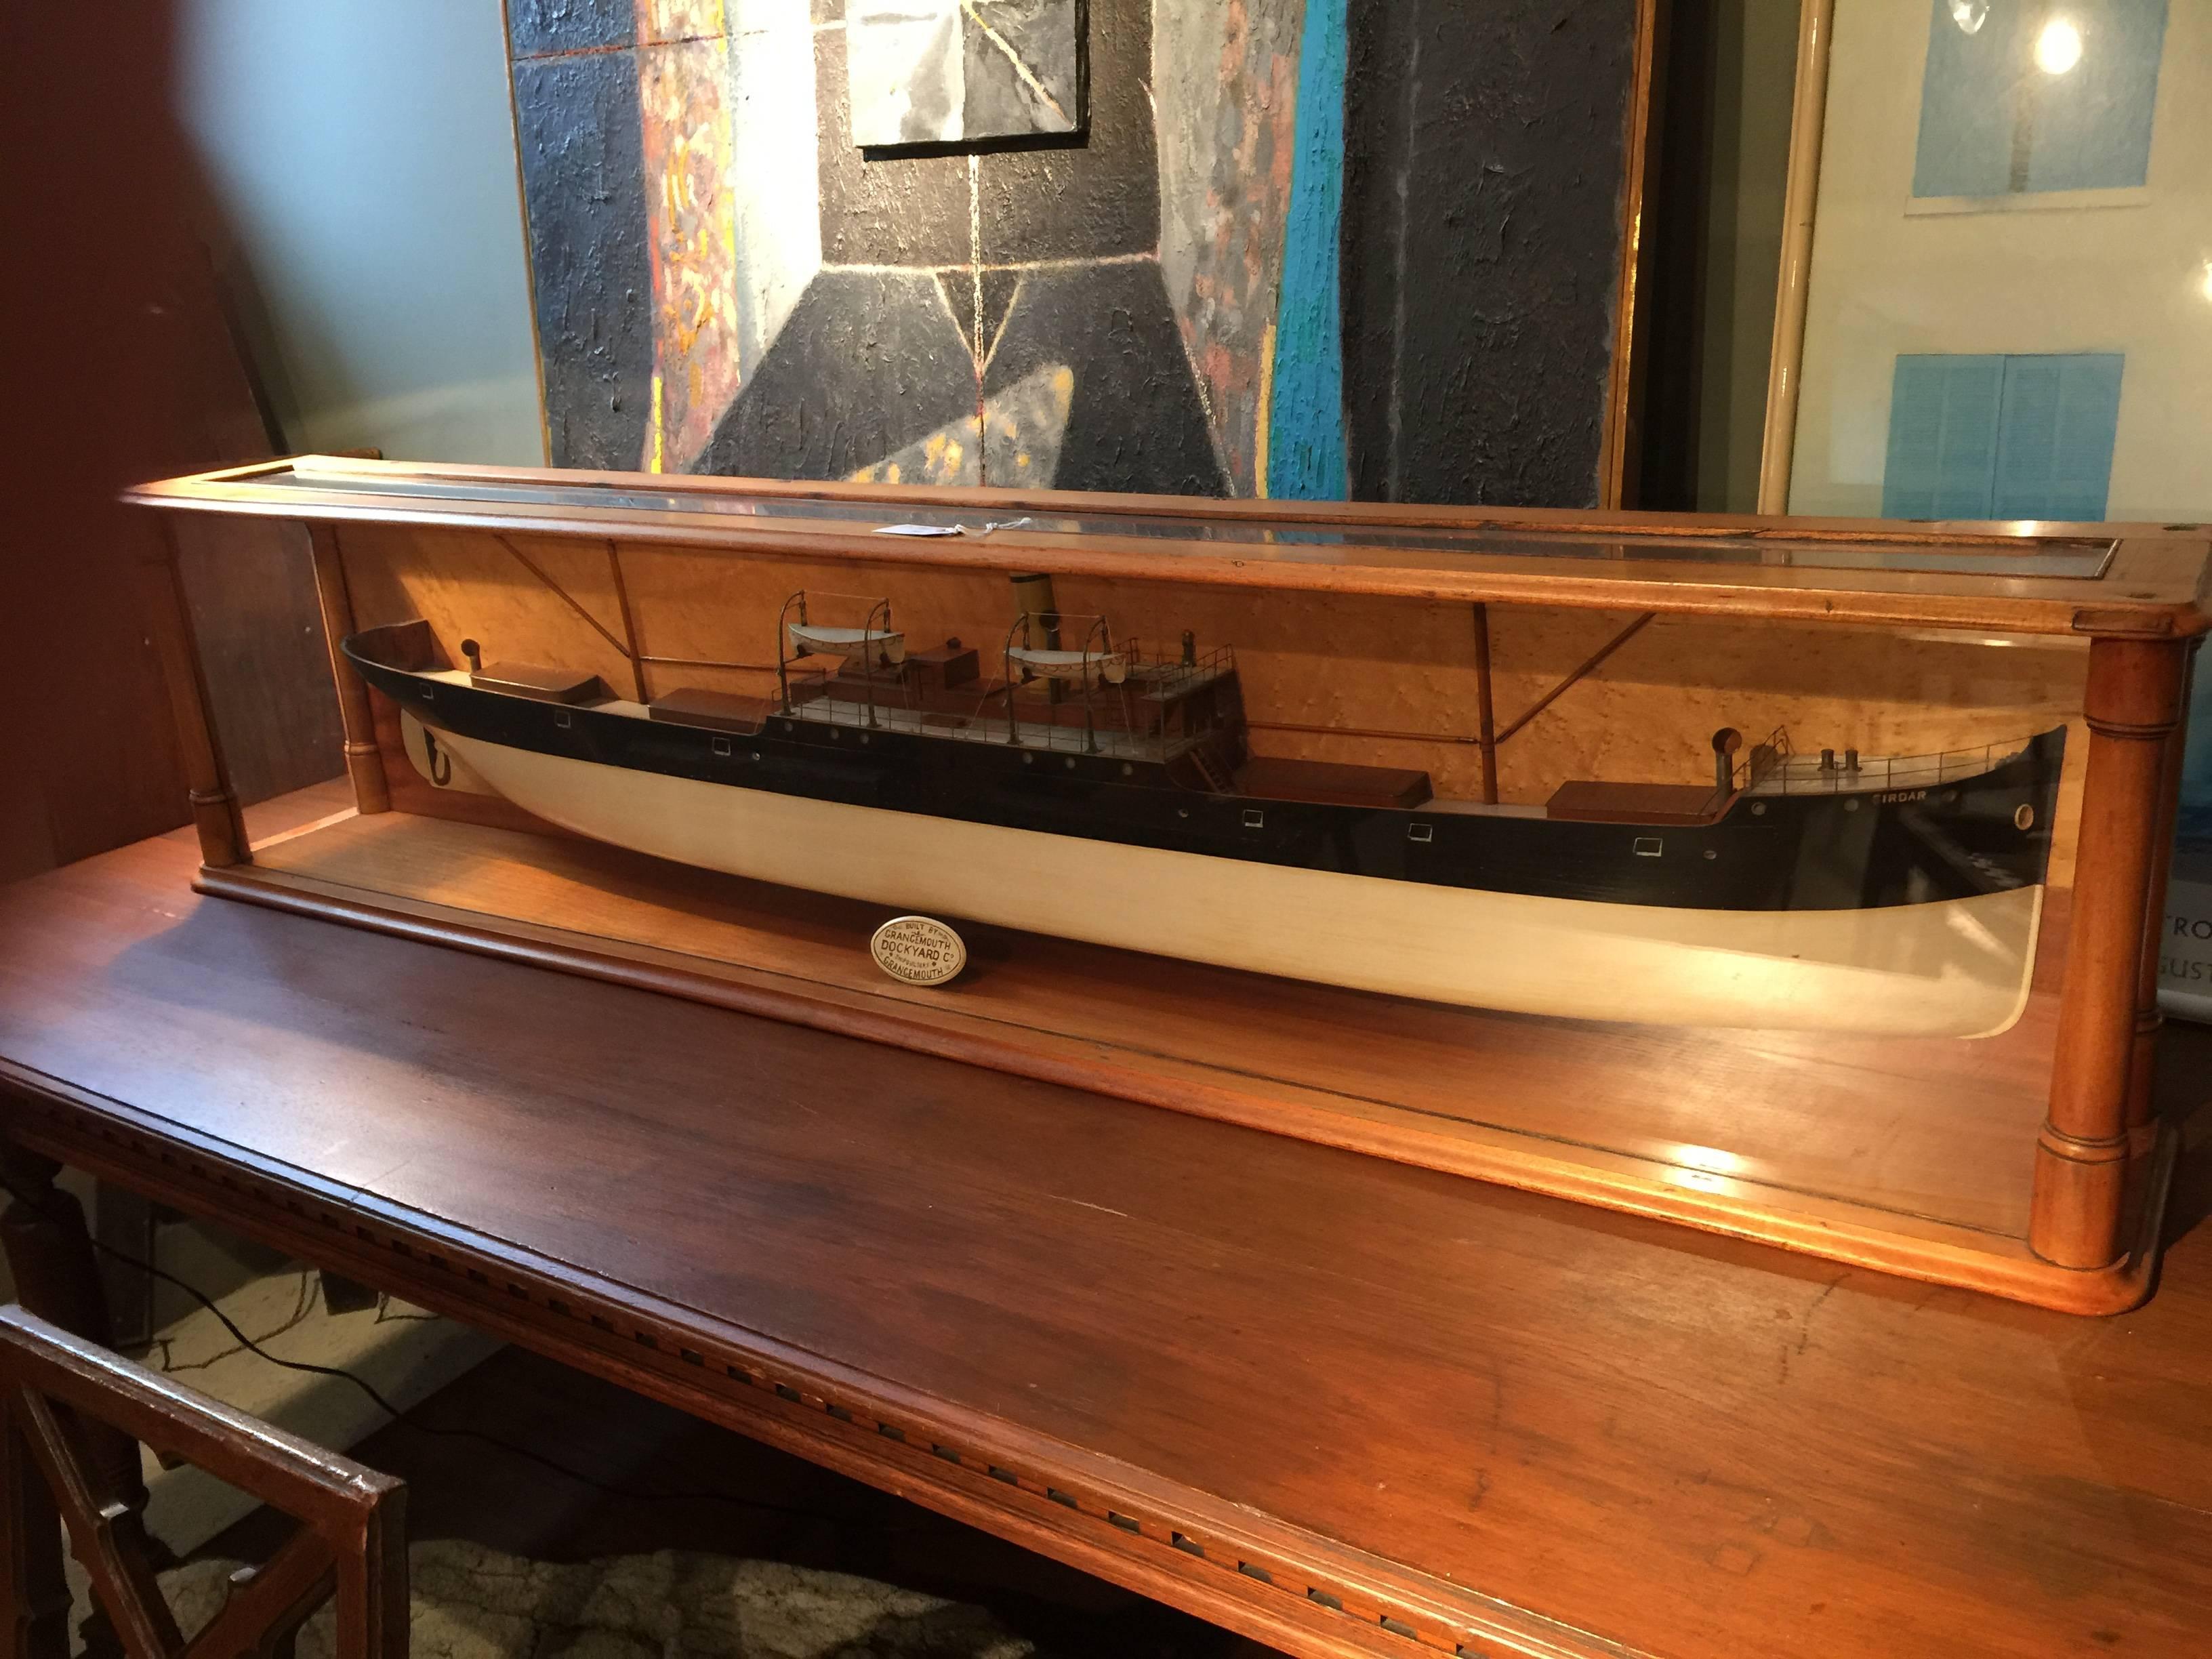 Large steamship model in beautiful case. 5 feet 8 inches long. Beautifully carved and painted nautical model in glass case.